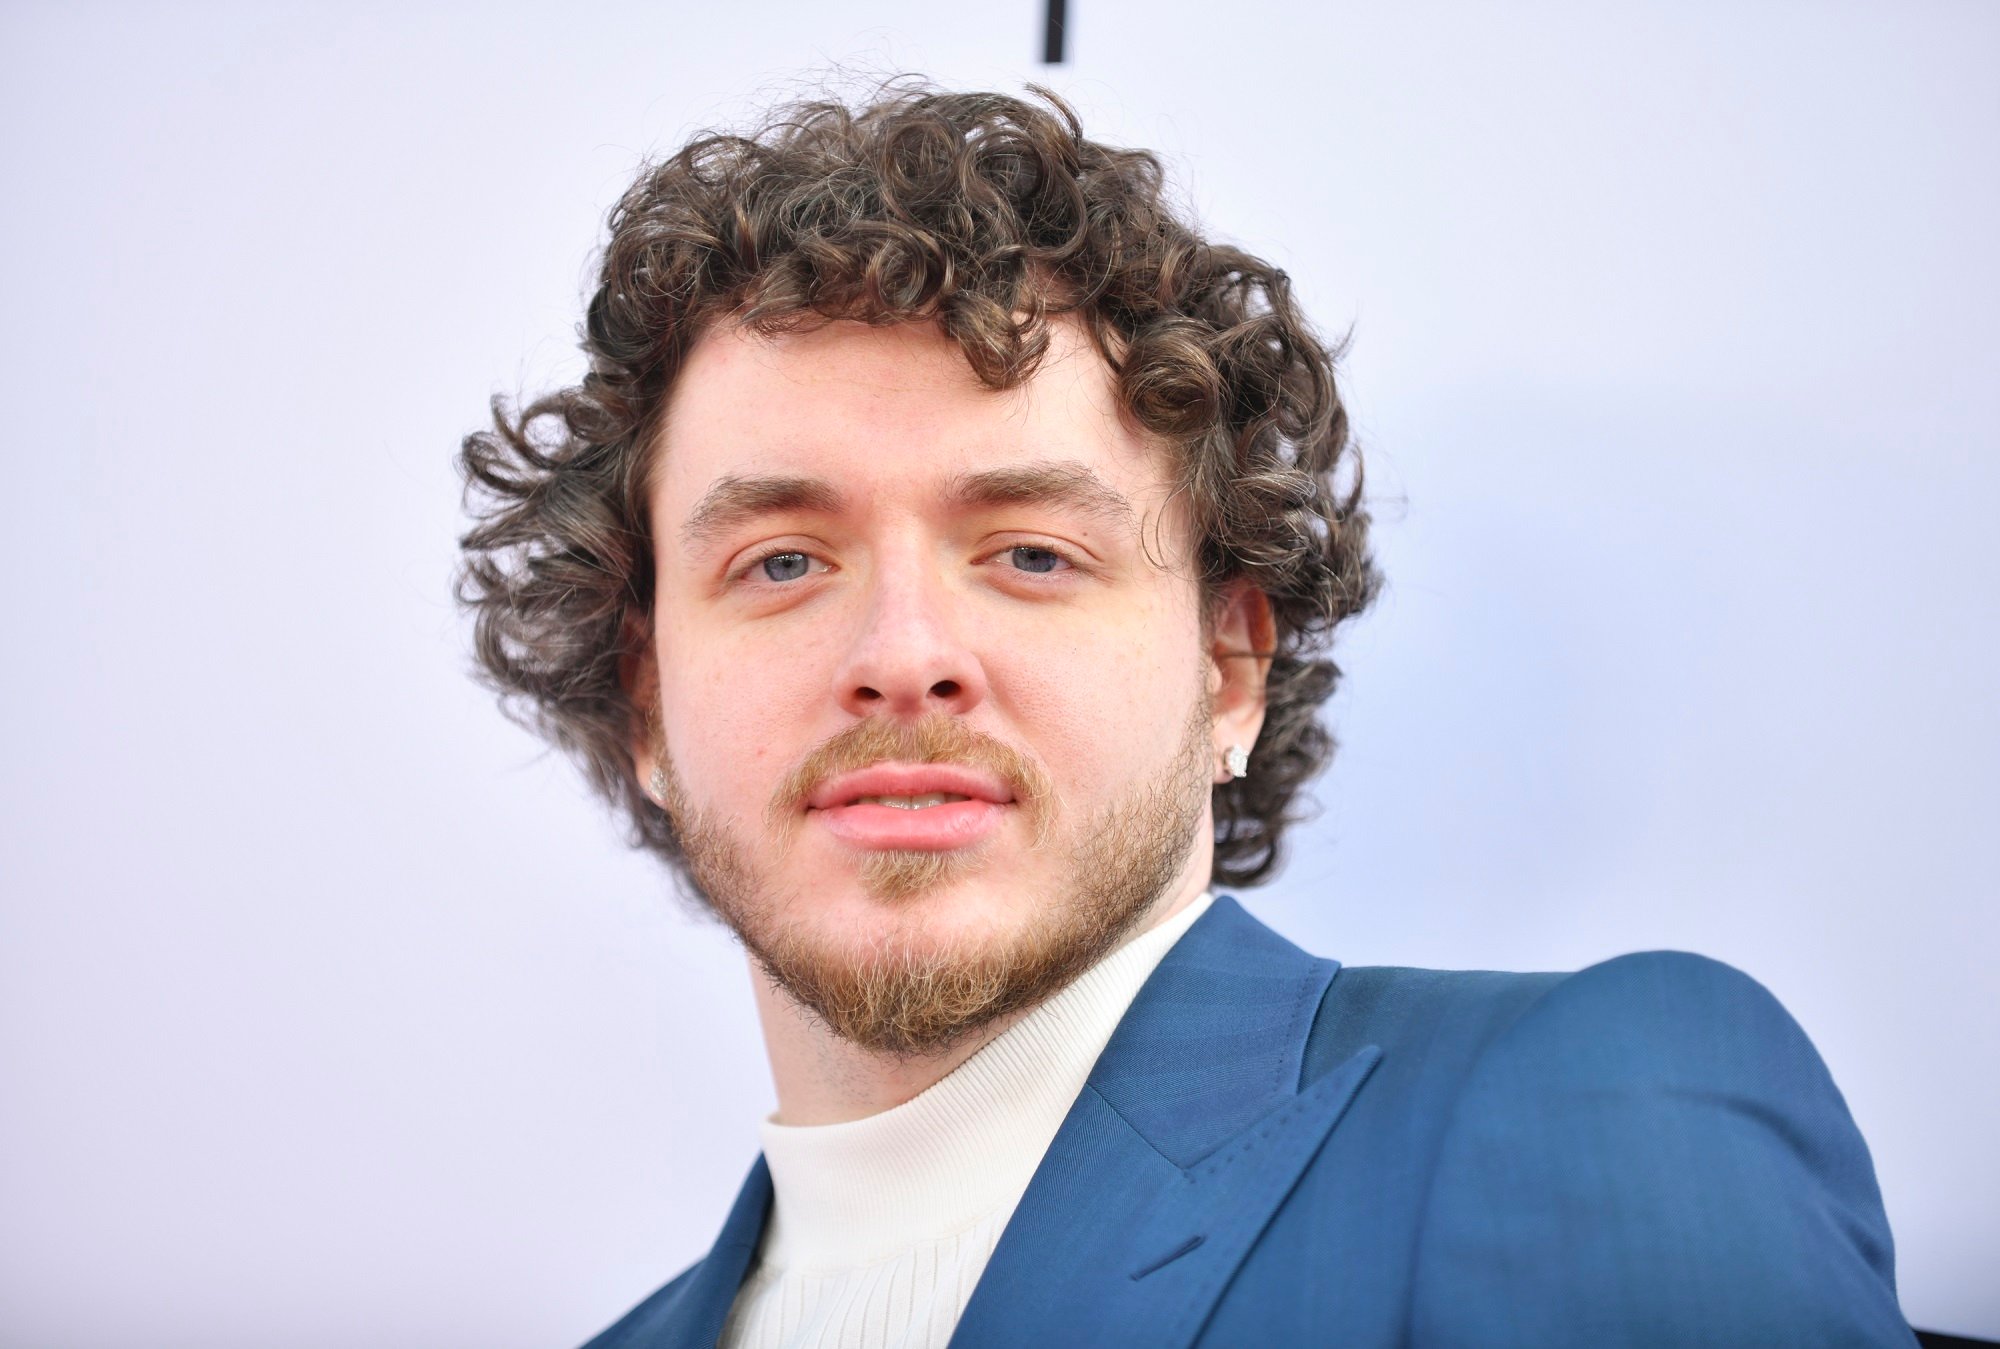 Jack Harlow attends Variety 2021 Music Hitmakers Brunch